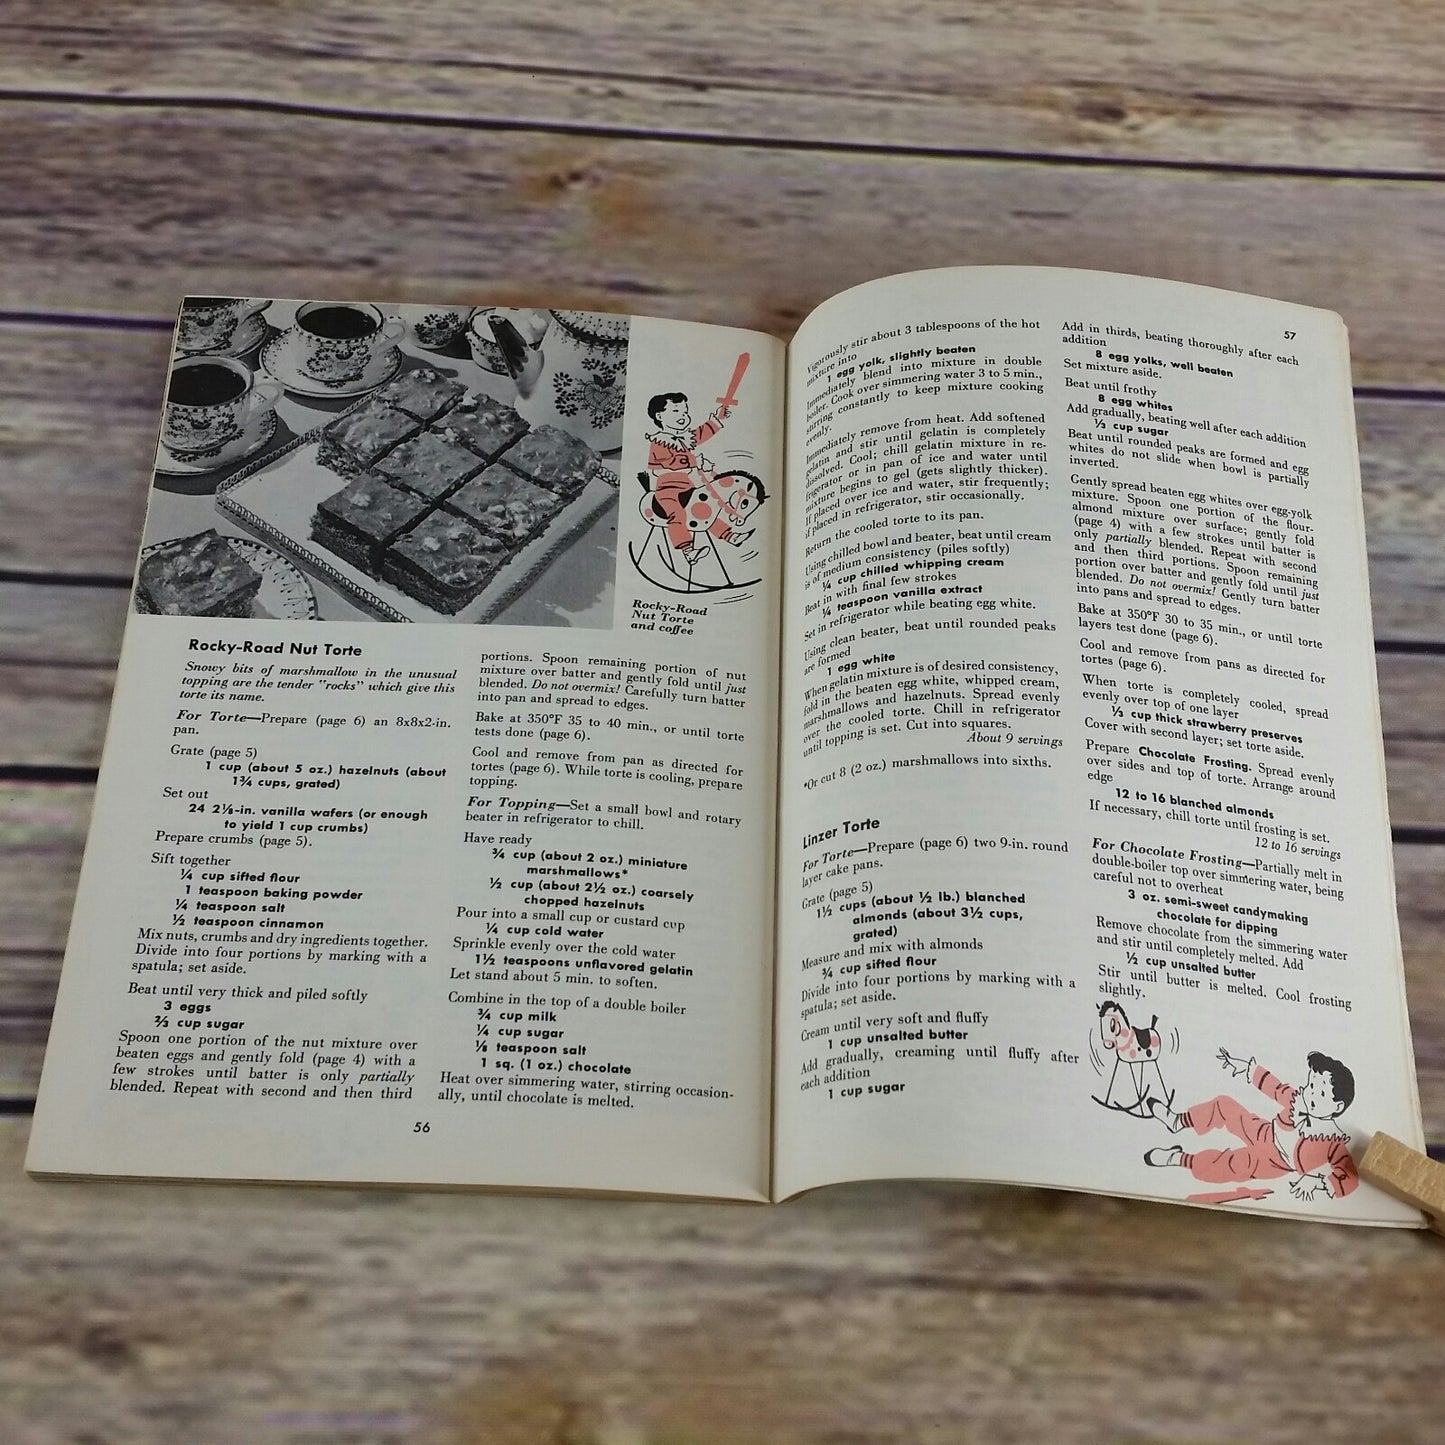 Vintage Cookbook Cakes and Tortes Culinary Arts Institute 1957 Booklet 105 Melanie De Proft - At Grandma's Table